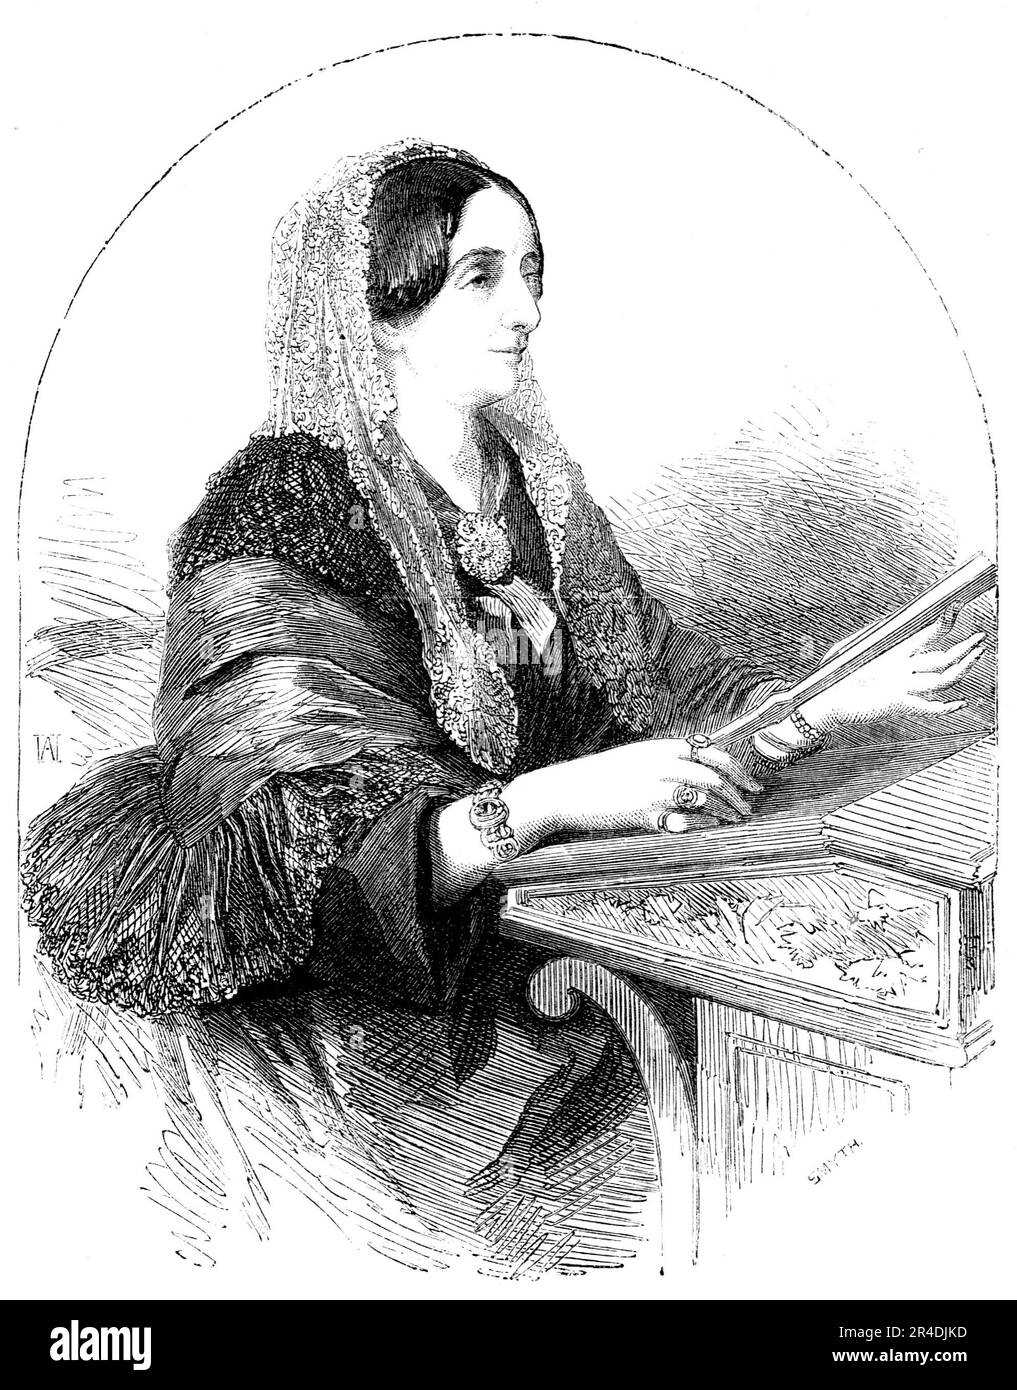 Sydney, Lady Morgan, authoress of &quot;The Wild Irish Girl&quot;, 1856. 'Lady Morgan is to be numbered amongst self-educated geniuses. But that her education was sedulously attended to from her earliest years is proved by her knowledge of foreign languages, and early acquaintance with English classical literature, apparent, to the very verge of pedantry, in her first works...Her contemporaries have seen her sparkling forth at the very earliest period of her girlhood with a fertility, versatility, and at the same time strength and maturity of genius, perfectly unequalled by any of her age or s Stock Photo